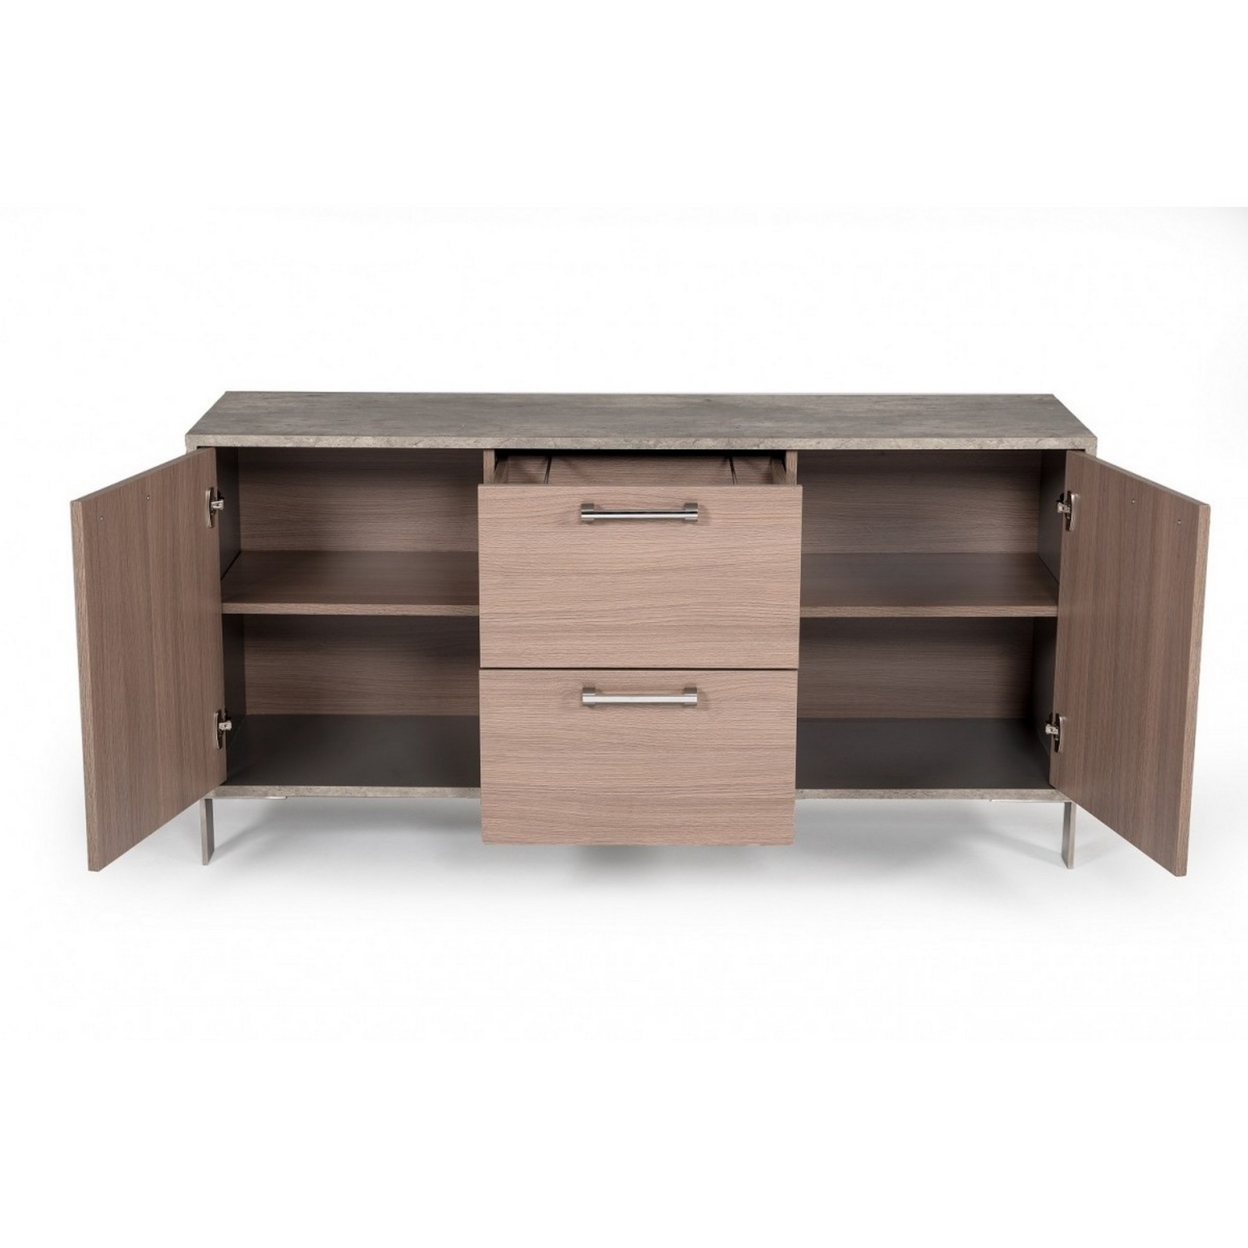 2 Door Buffet With Faux Concrete Top And 2 Drawers, Brown And Gray- Saltoro Sherpi